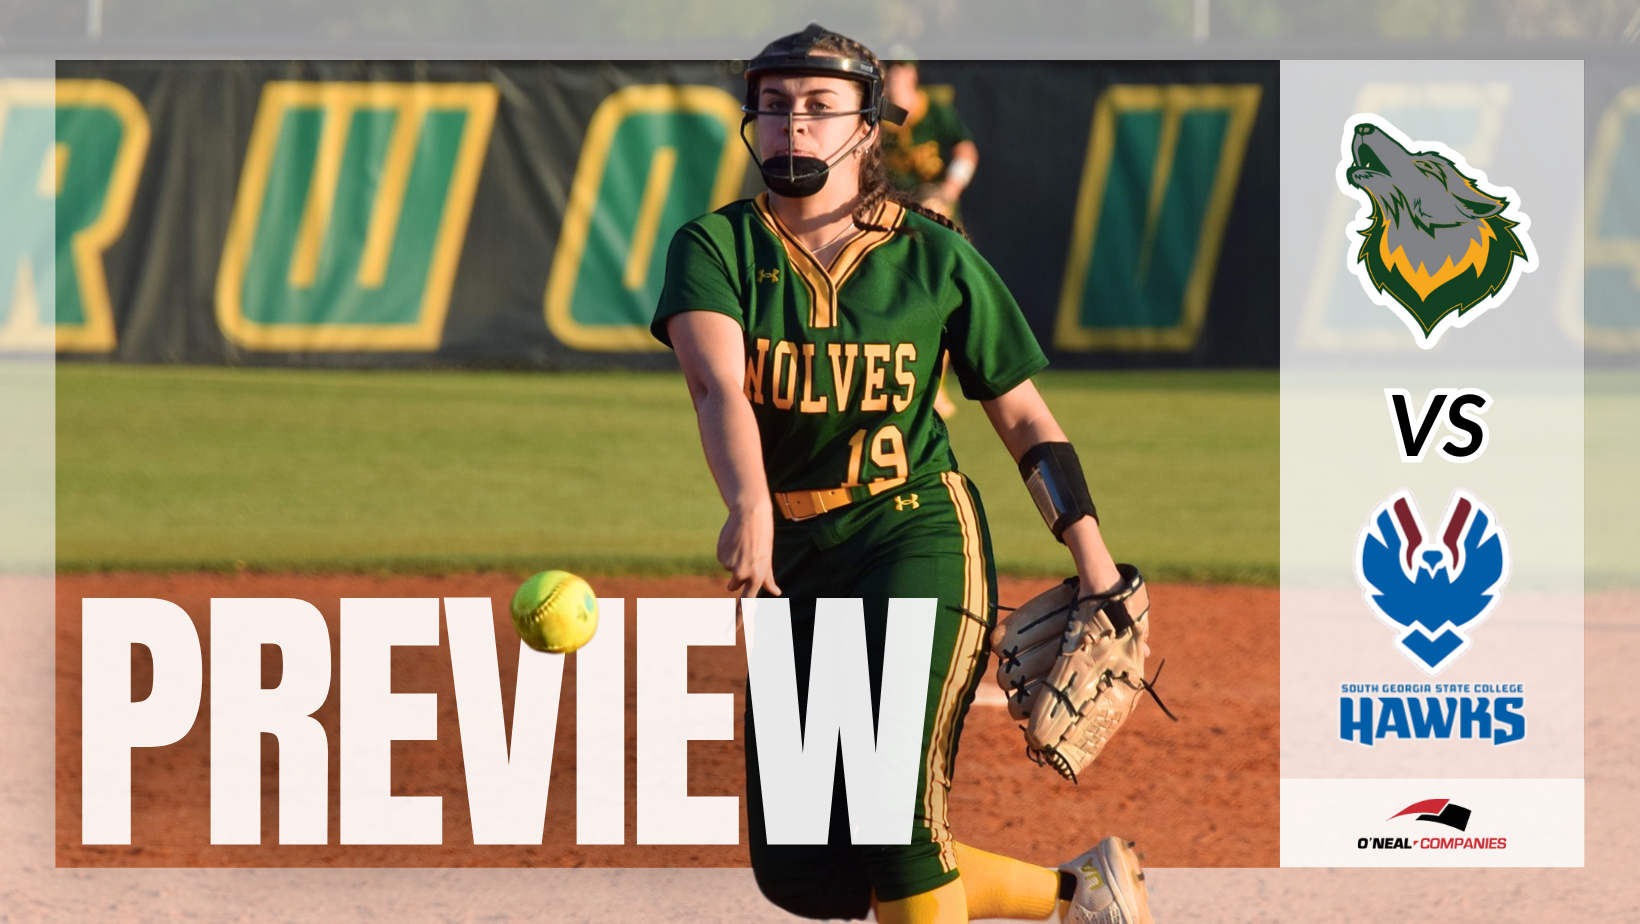 Timberwolves Set to Face South Georgia State College in Softball Showdown